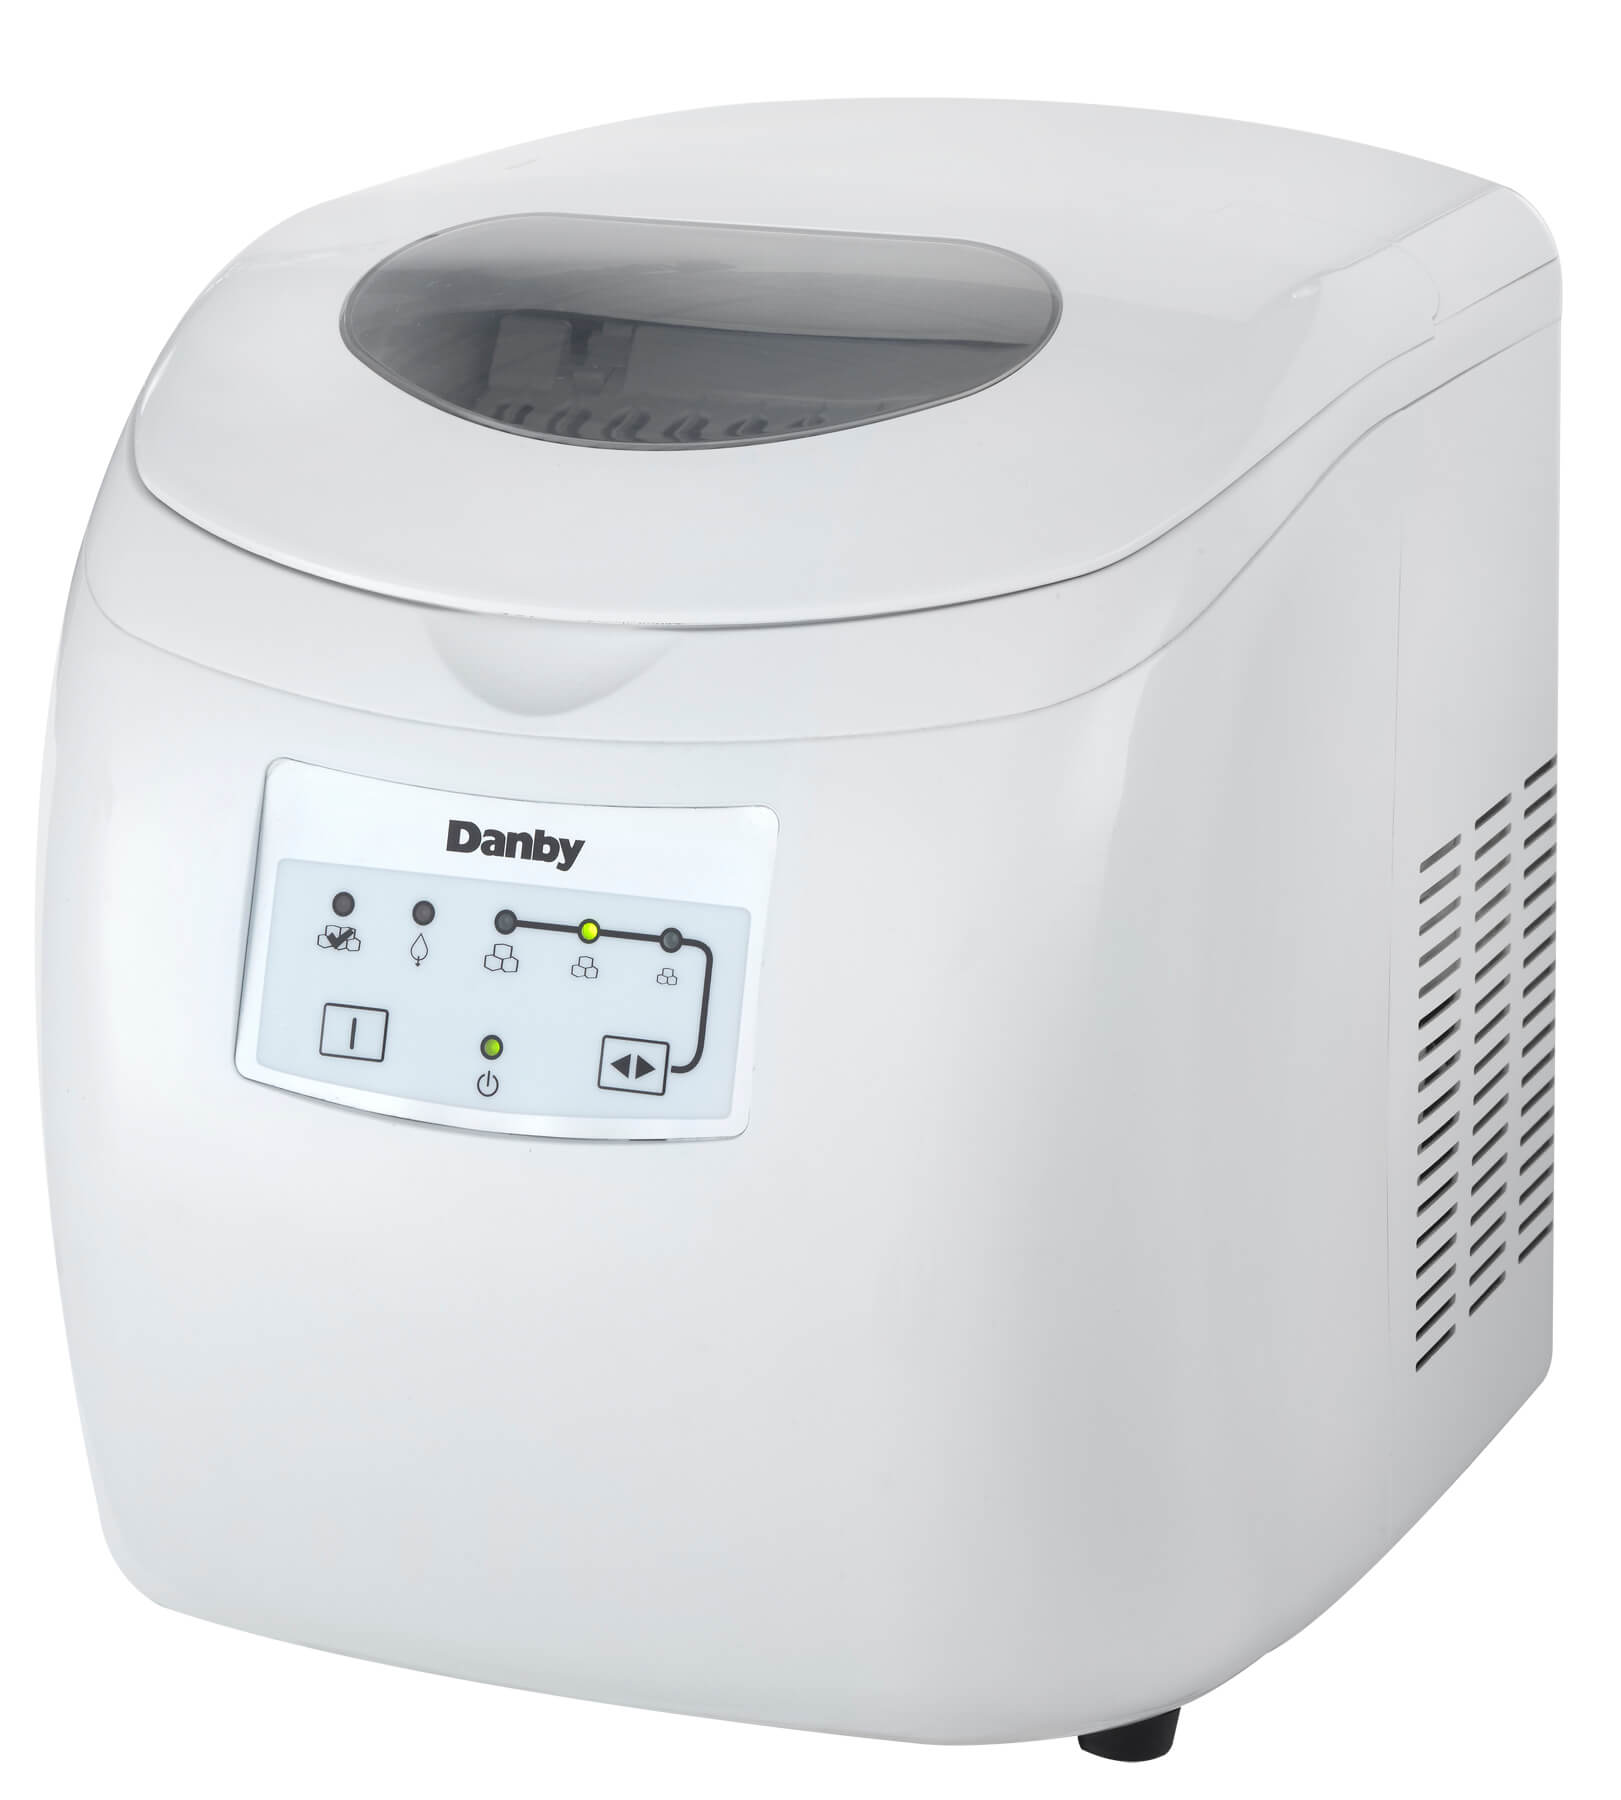 Danby 25 lbs. Countertop Ice Maker in White